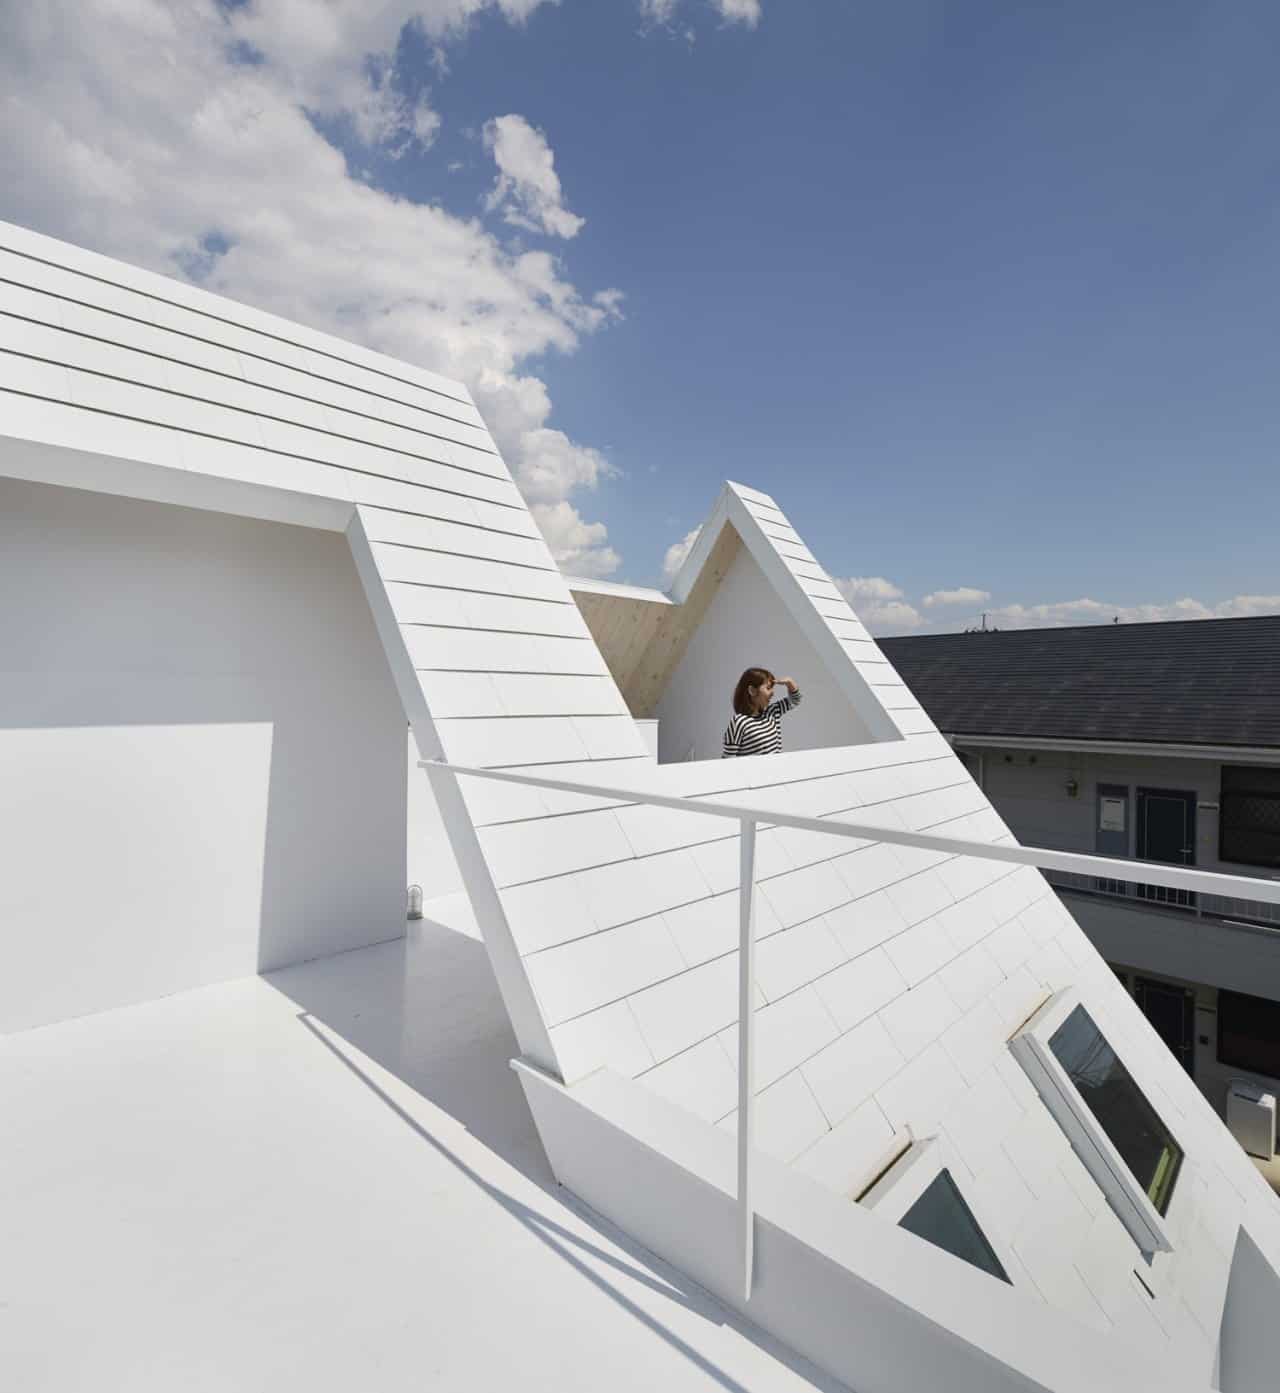 4-a-frame-roofline-contains-indoor-outdoor-areas .jpg